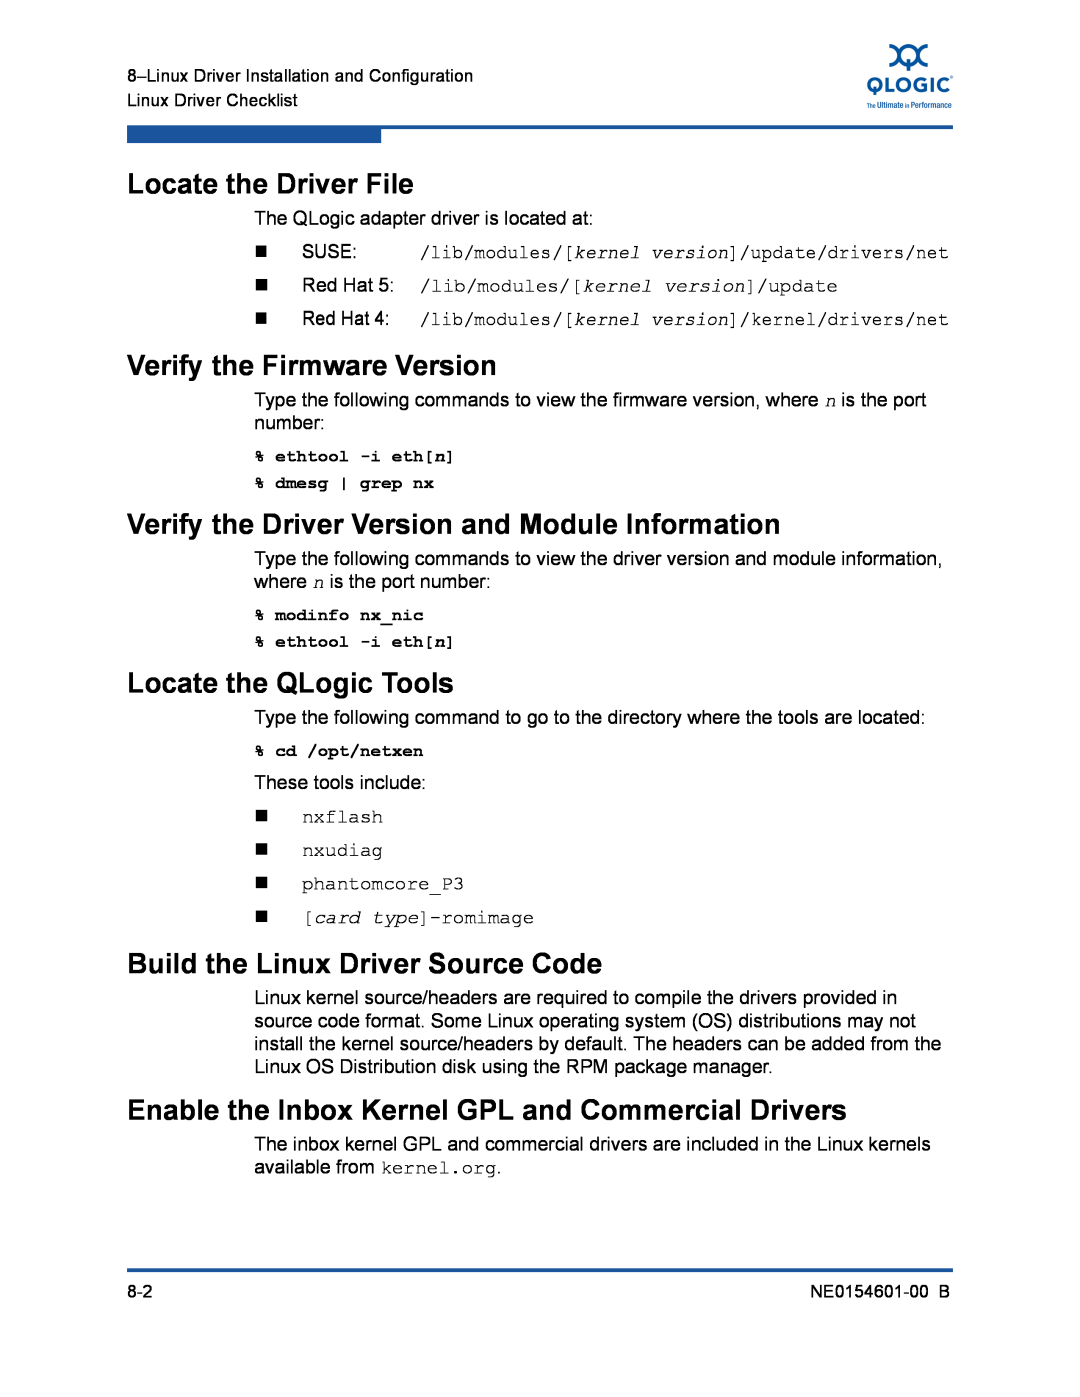 Q-Logic 3100, 3000 Locate the Driver File, Verify the Firmware Version, Verify the Driver Version and Module Information 